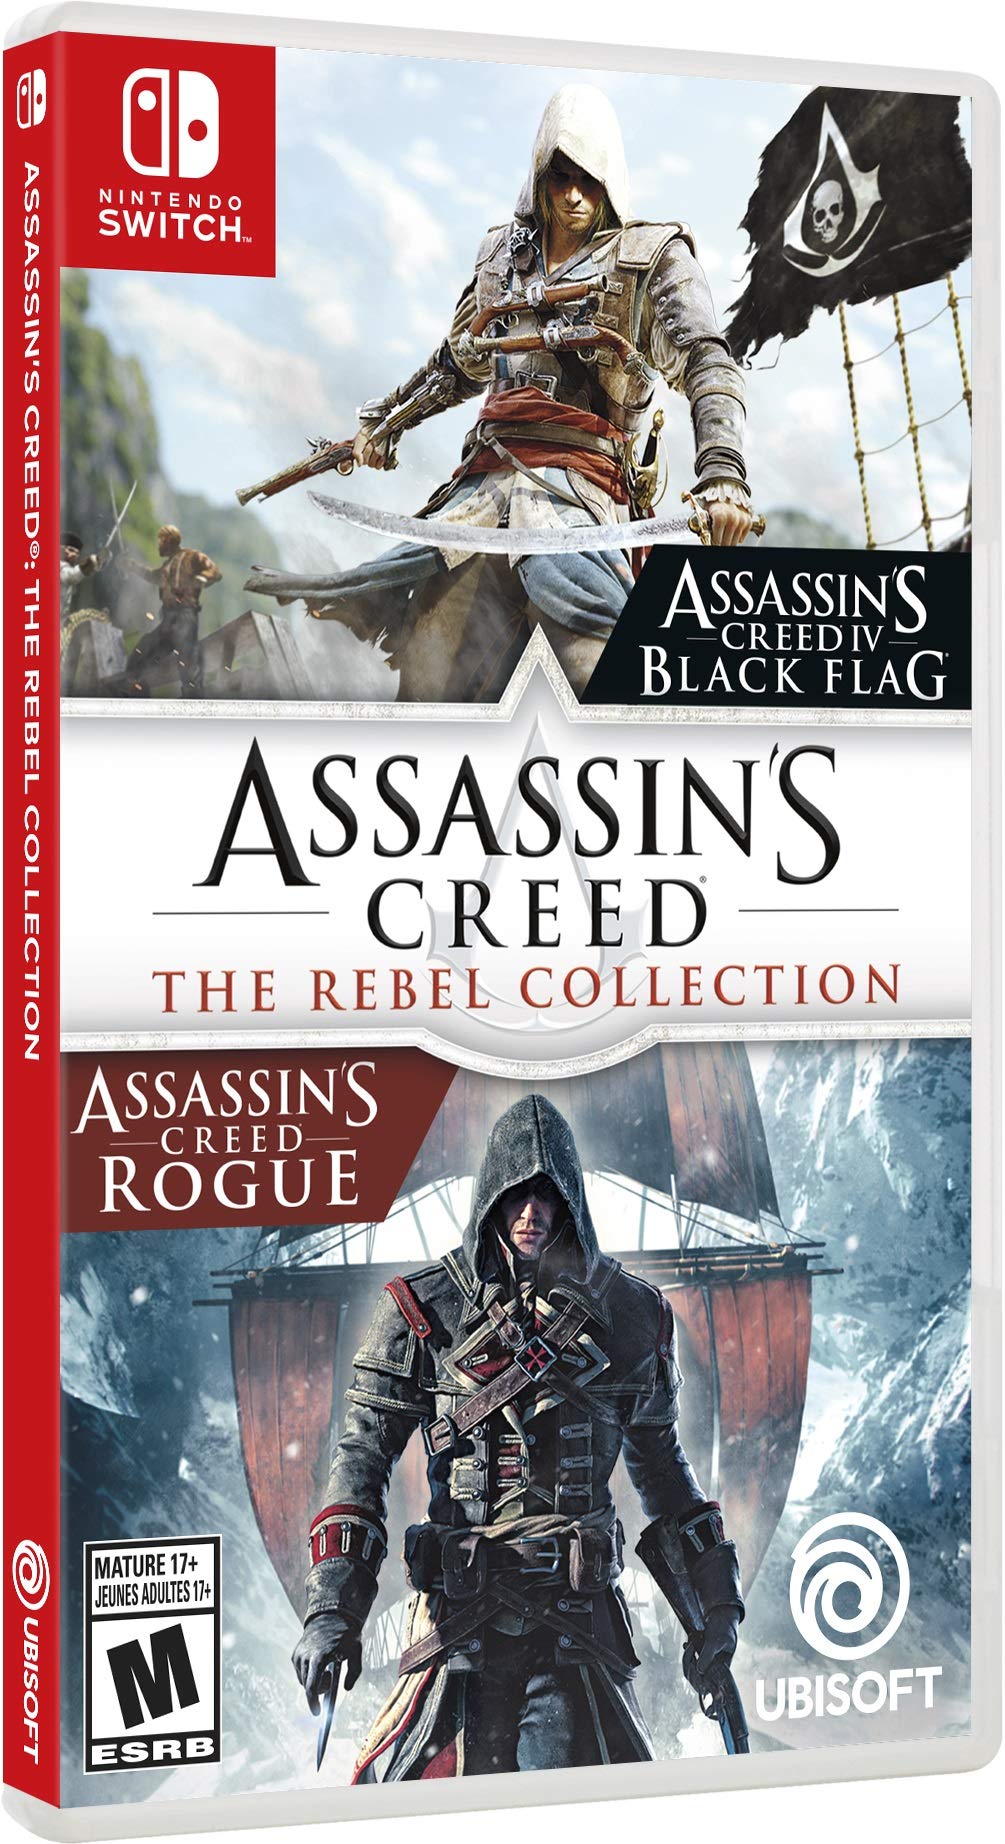 Assassin's Creed: The Rebel Collection (Nintendo Switch Physical) $14.97 + Free Shipping w/ Prime or on $35+